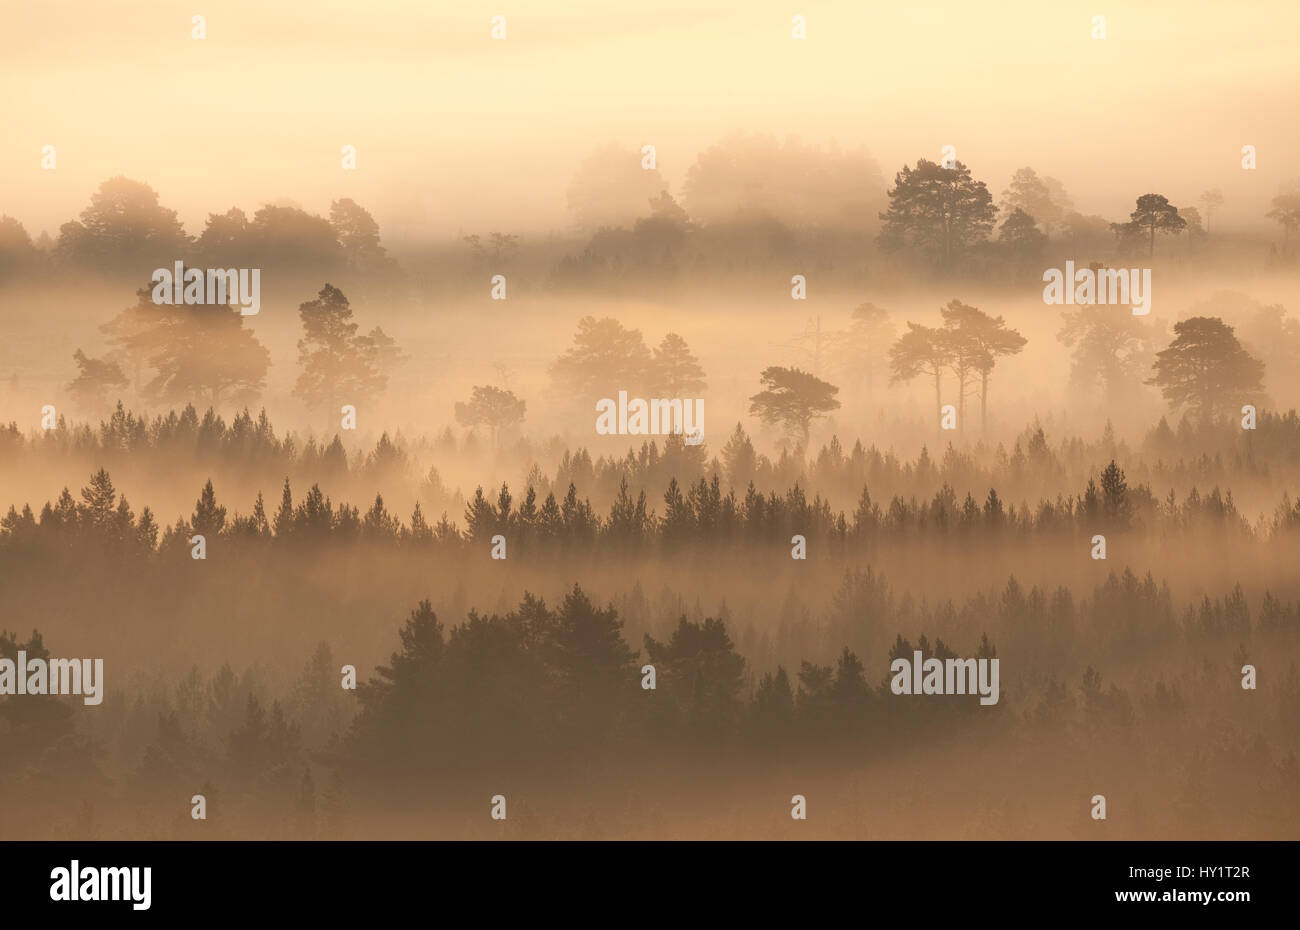 Native pine forest silhouetted in dawn mist. Scotland, UK, 2009. Stock Photo